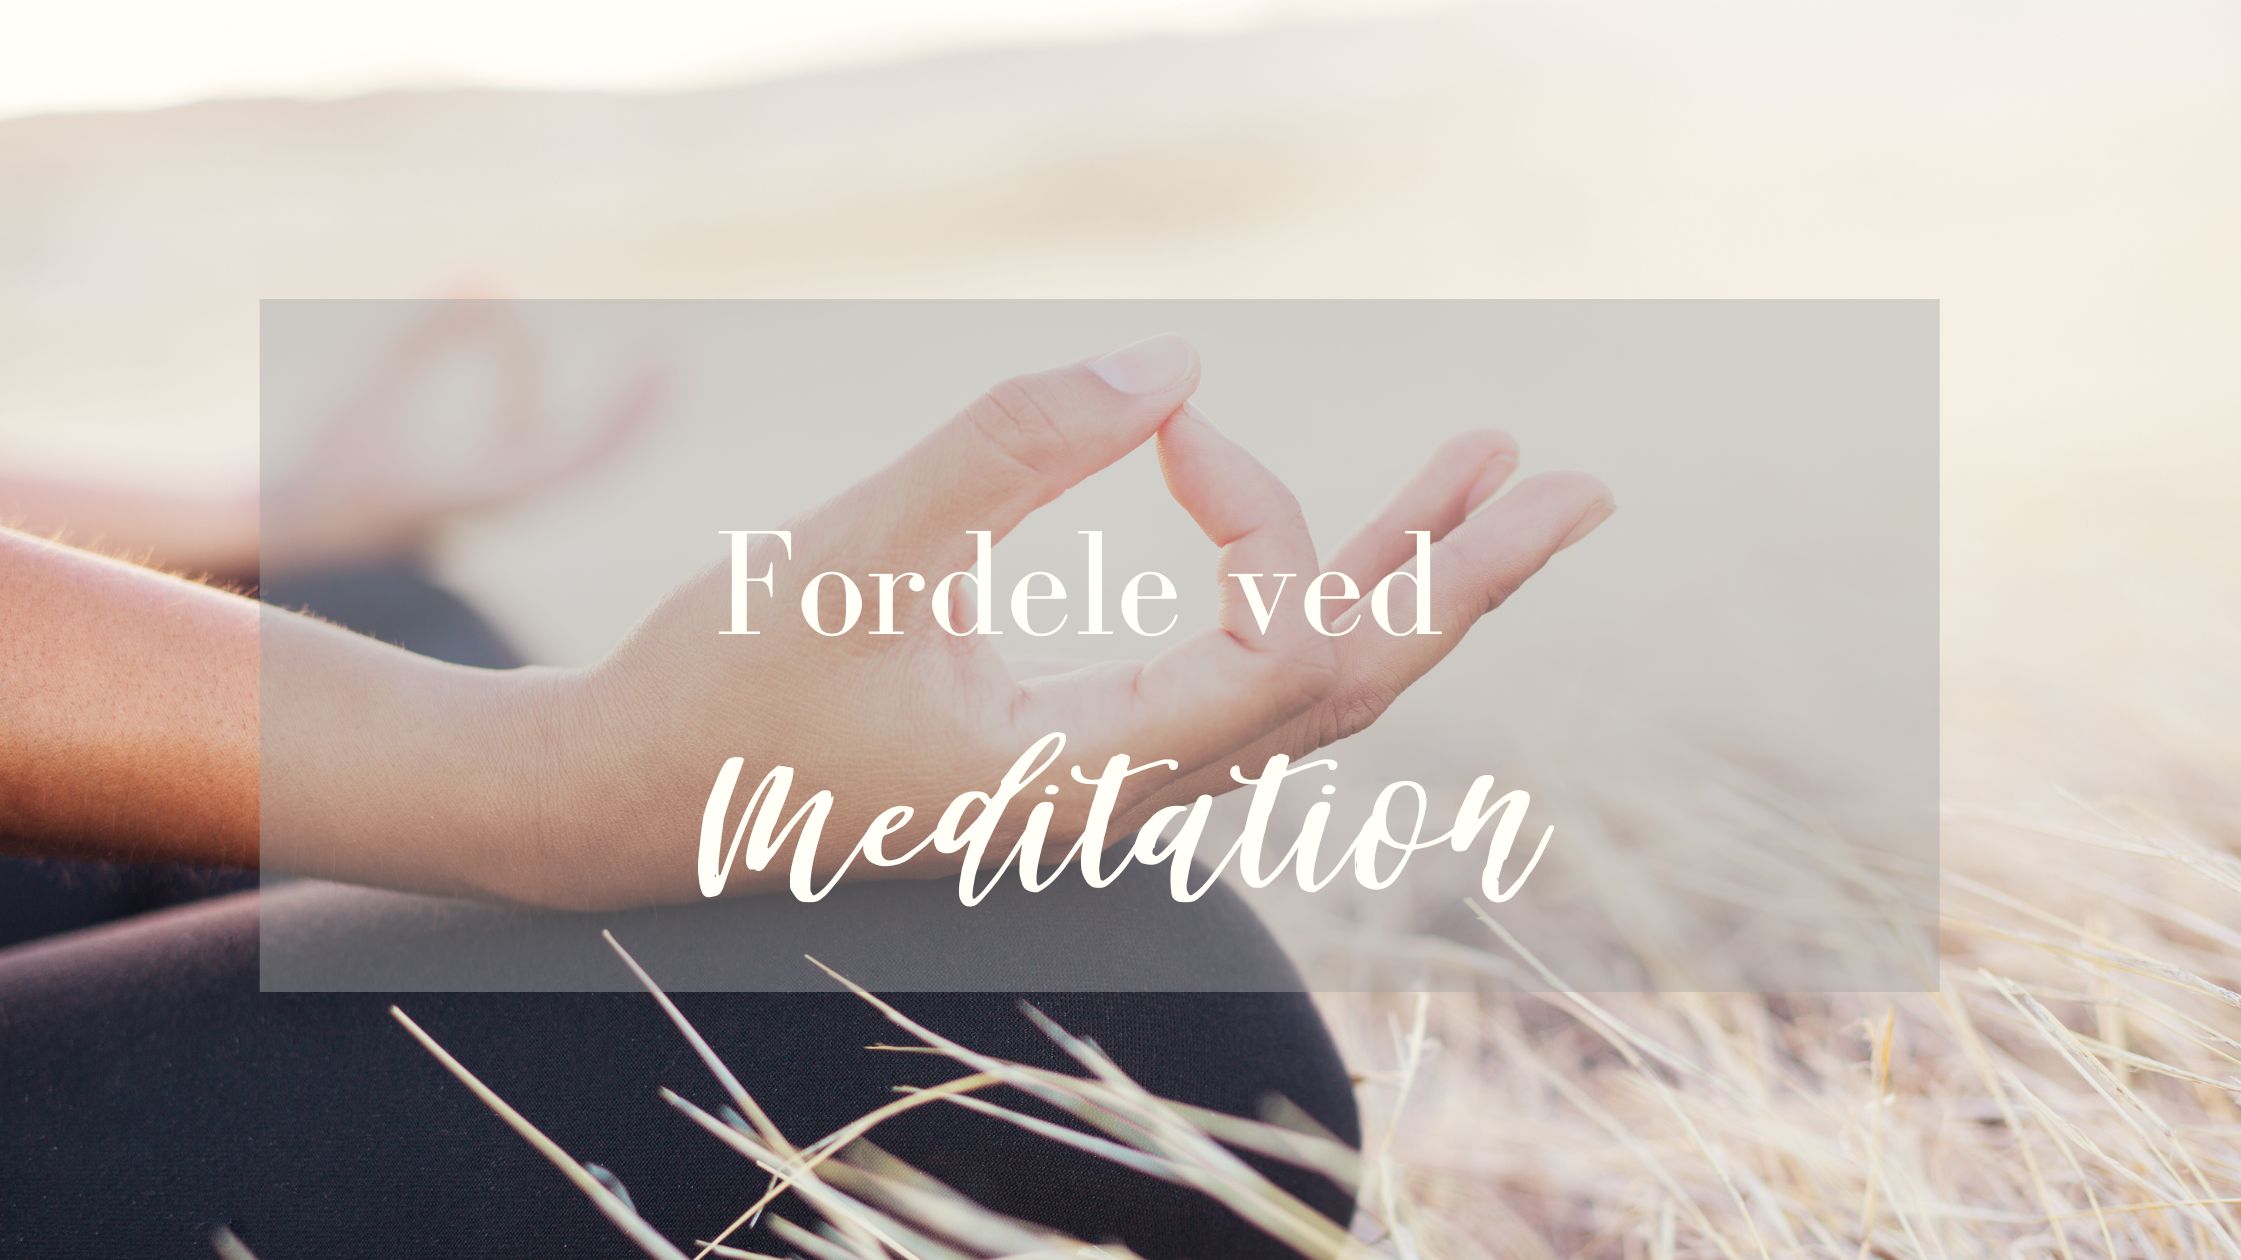 You are currently viewing Fordele ved at meditere